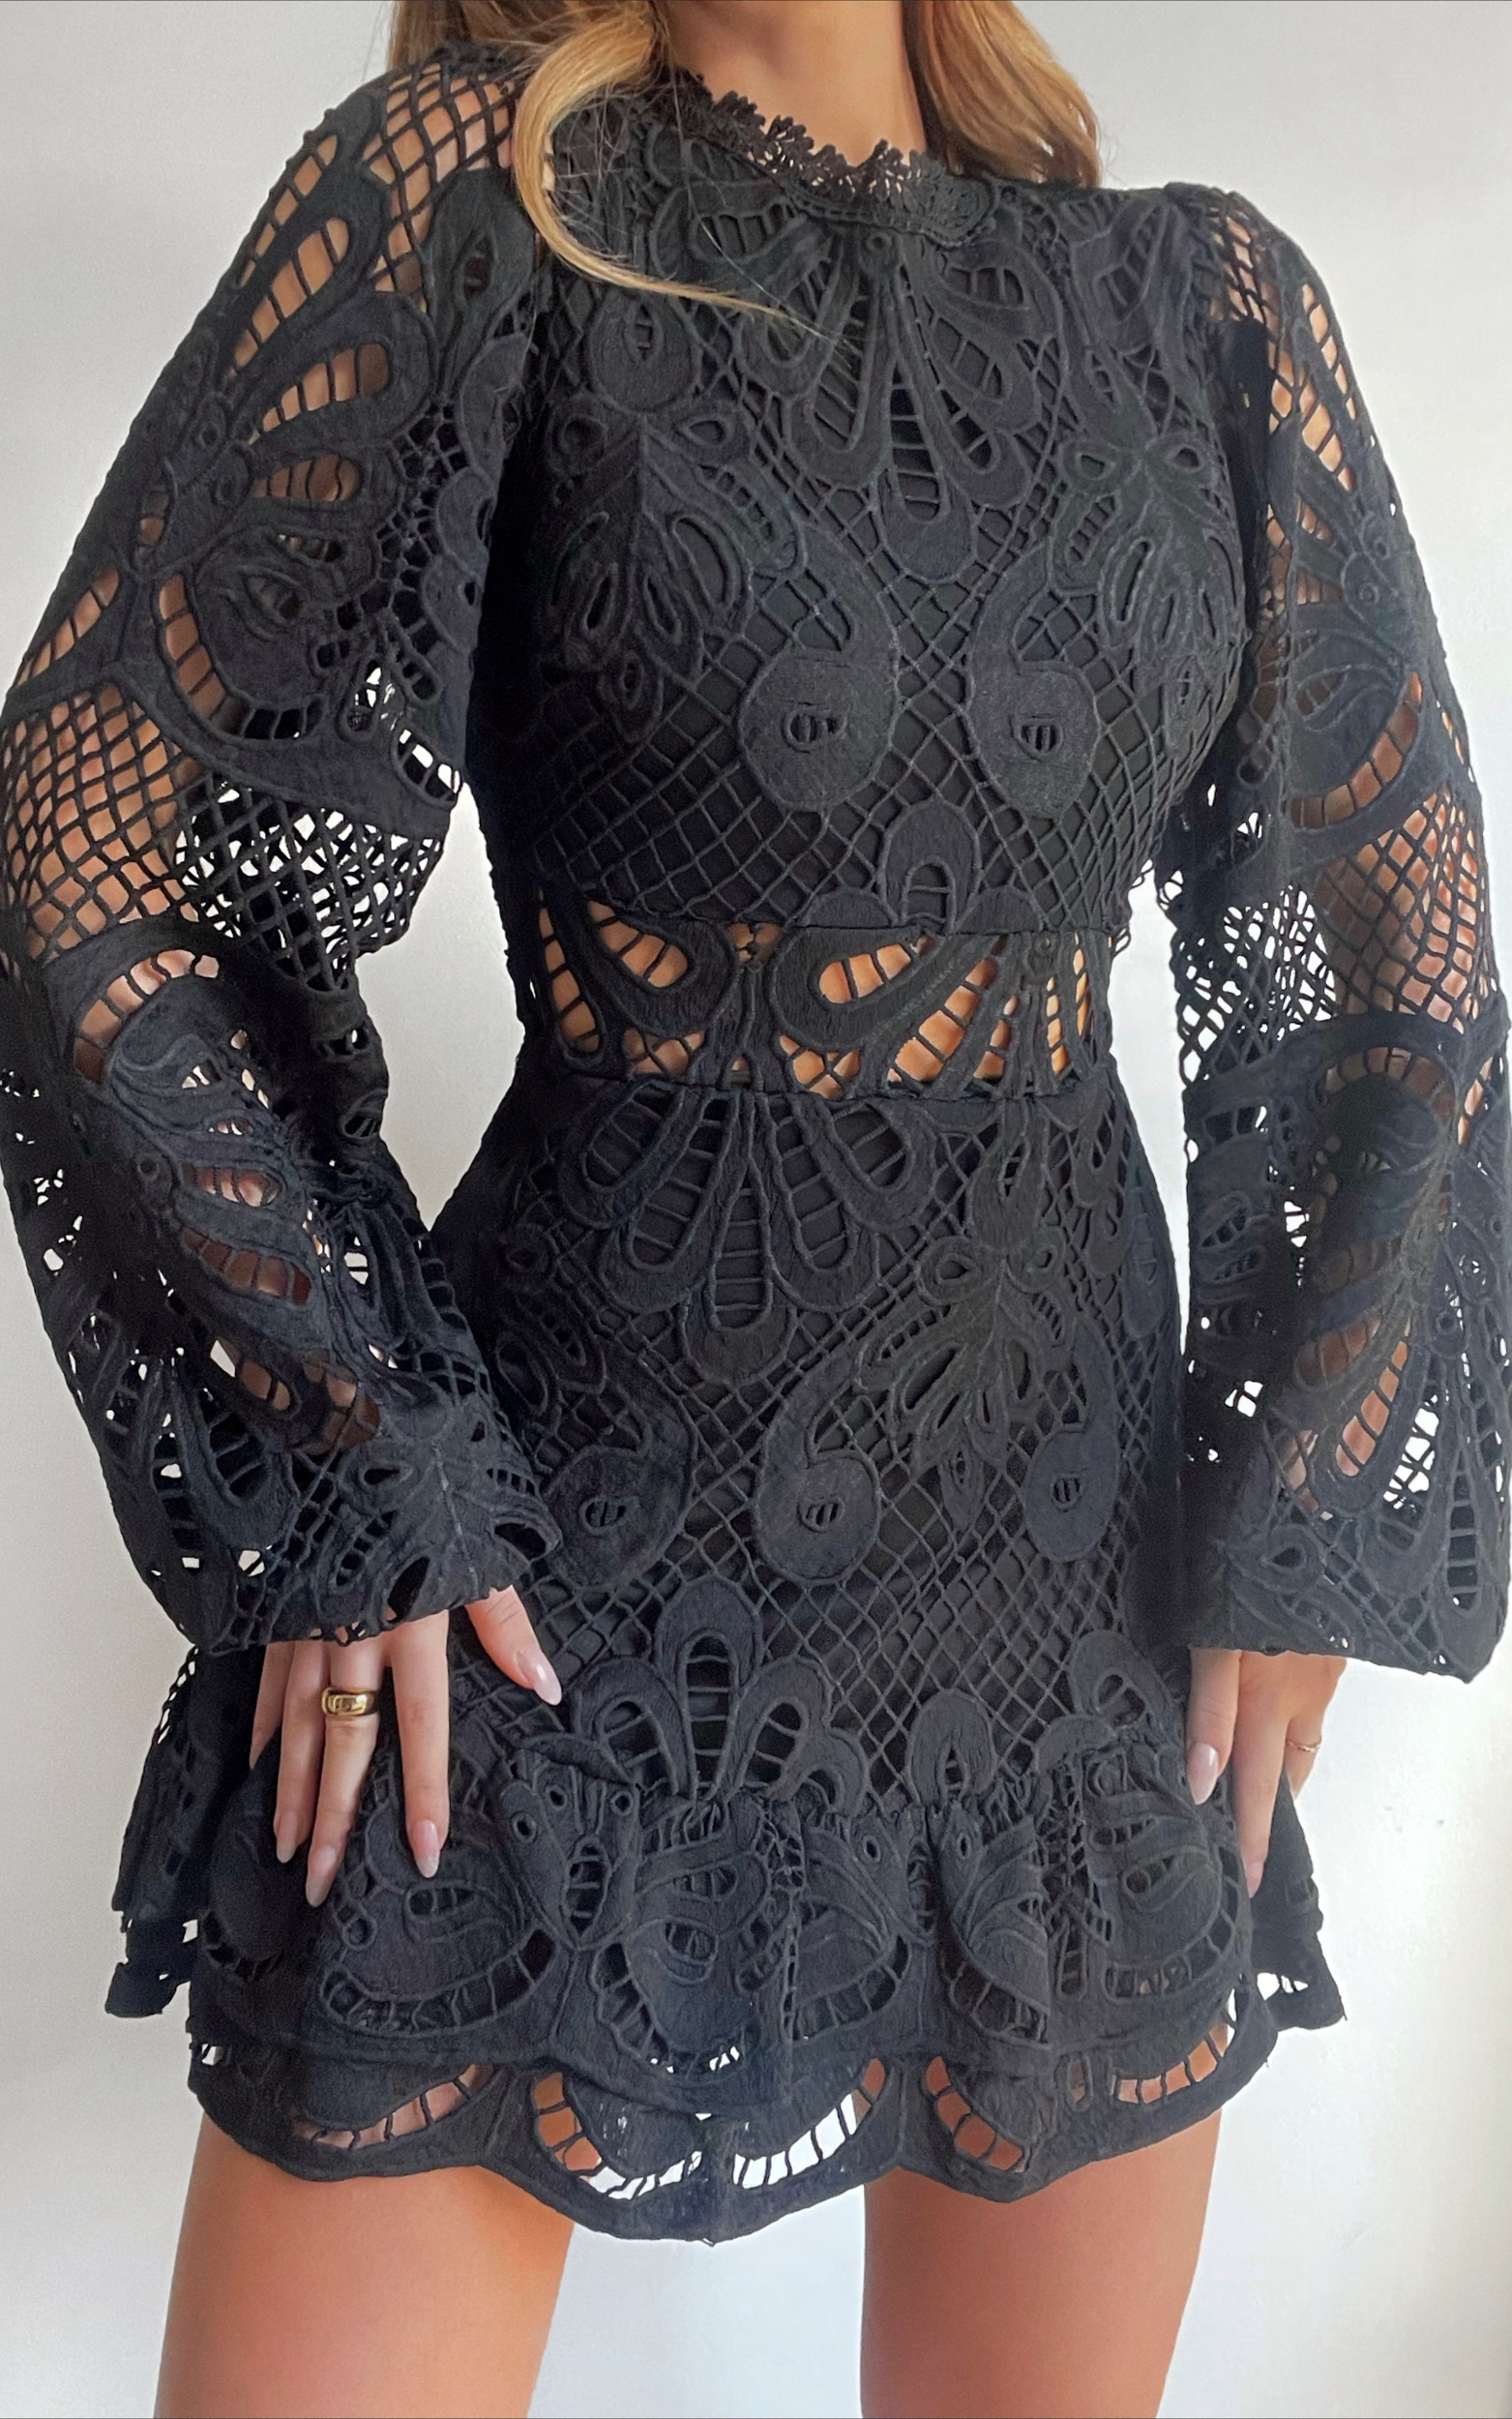 Kiss Me Now Dress in Black Lace - 06, BLK1, hi-res image number null